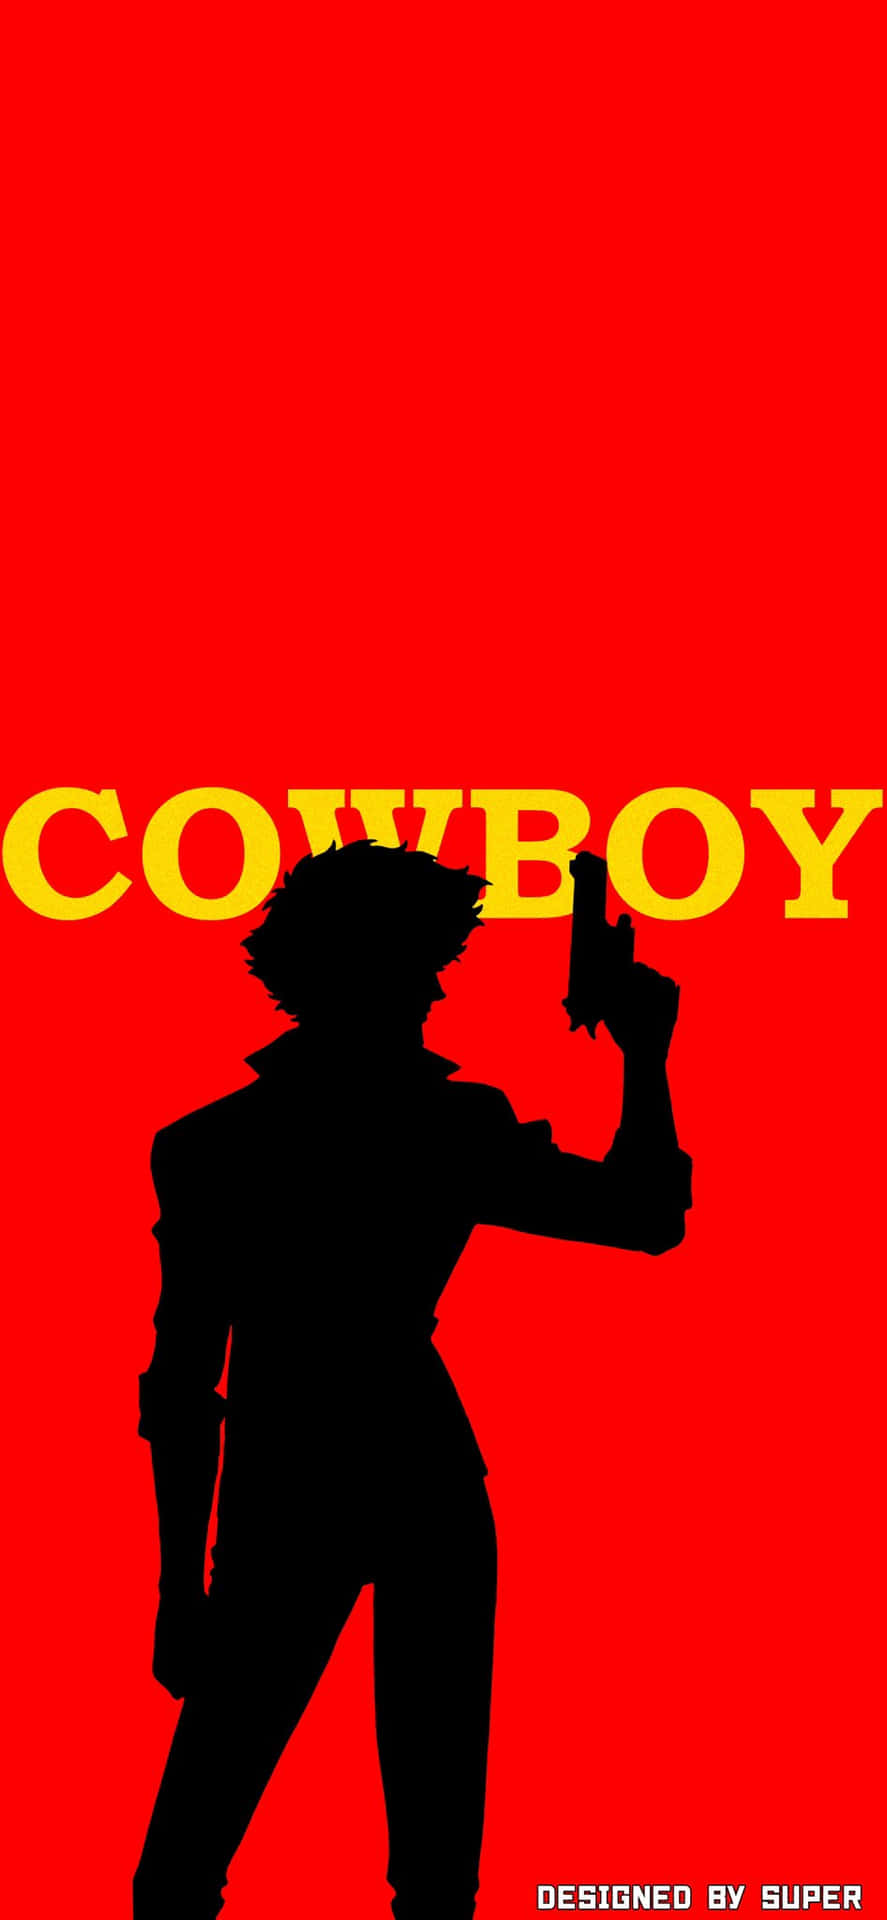 Get Ready to Explore the Universe with Cowboy Bebop on your iPhone Wallpaper